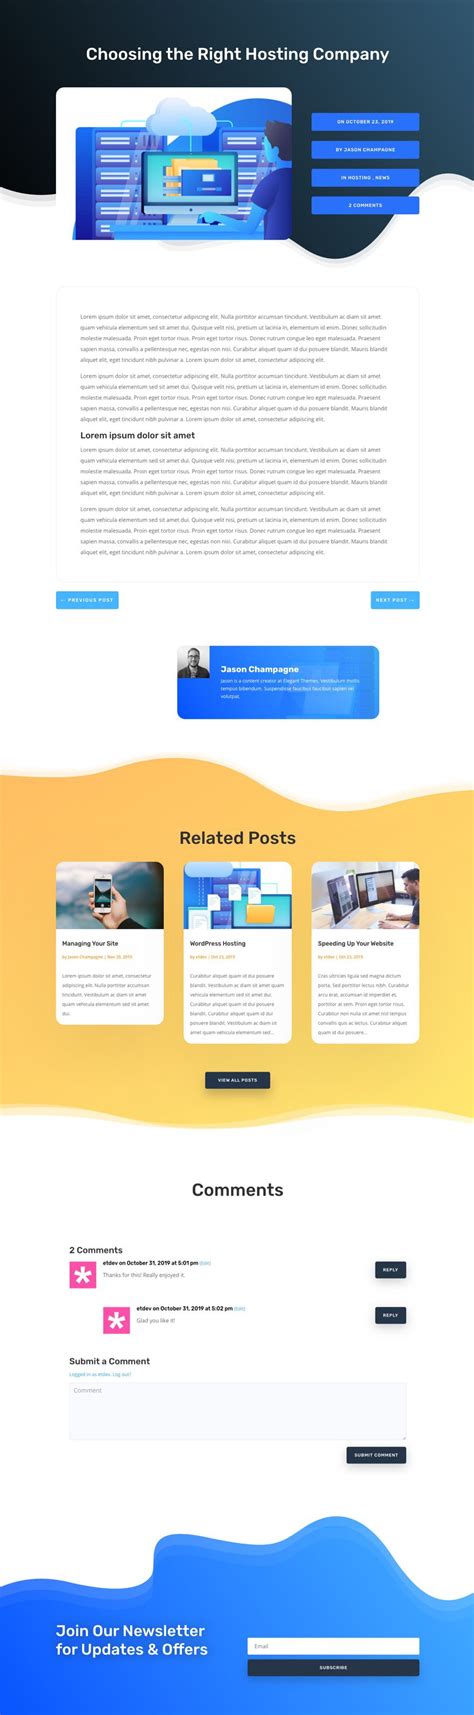 Get A Free Blog Post Template For Divis Hosting Company Layout Pack